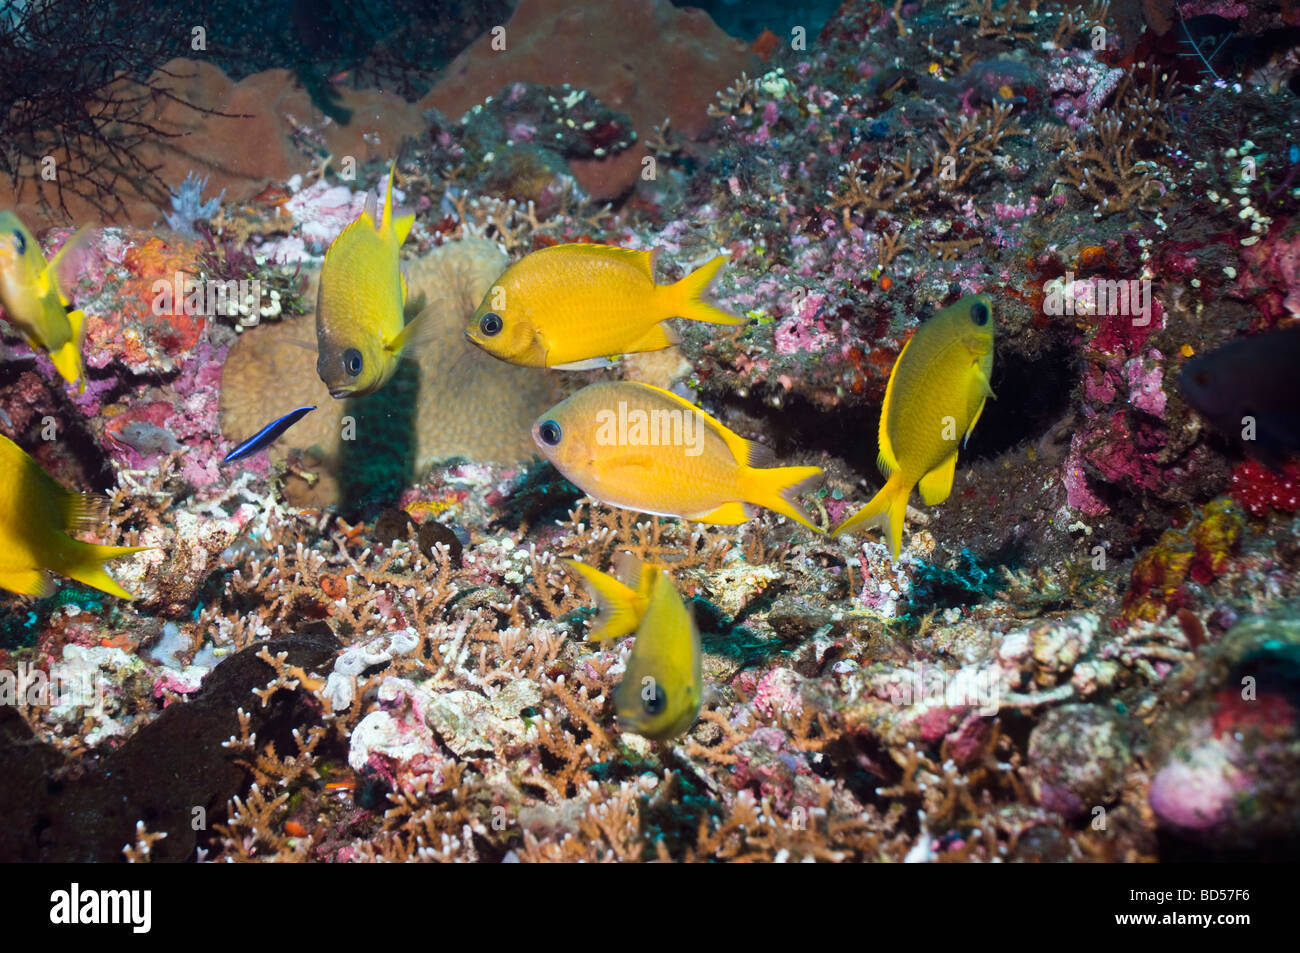 Yellow chromis Chromis analis at cleaning station Bali Indonesia Stock Photo